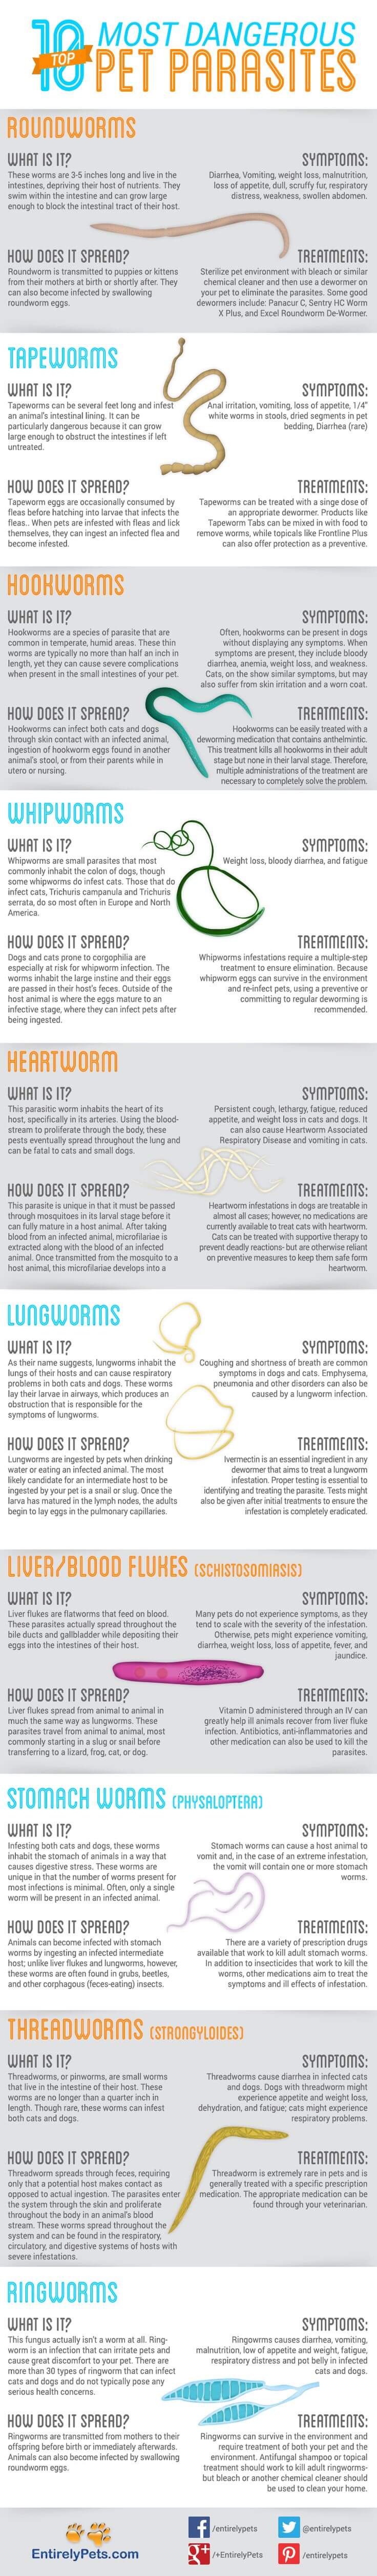 Dog Parasites Infogram - PRESS TO SEE IN FULL SIZE!